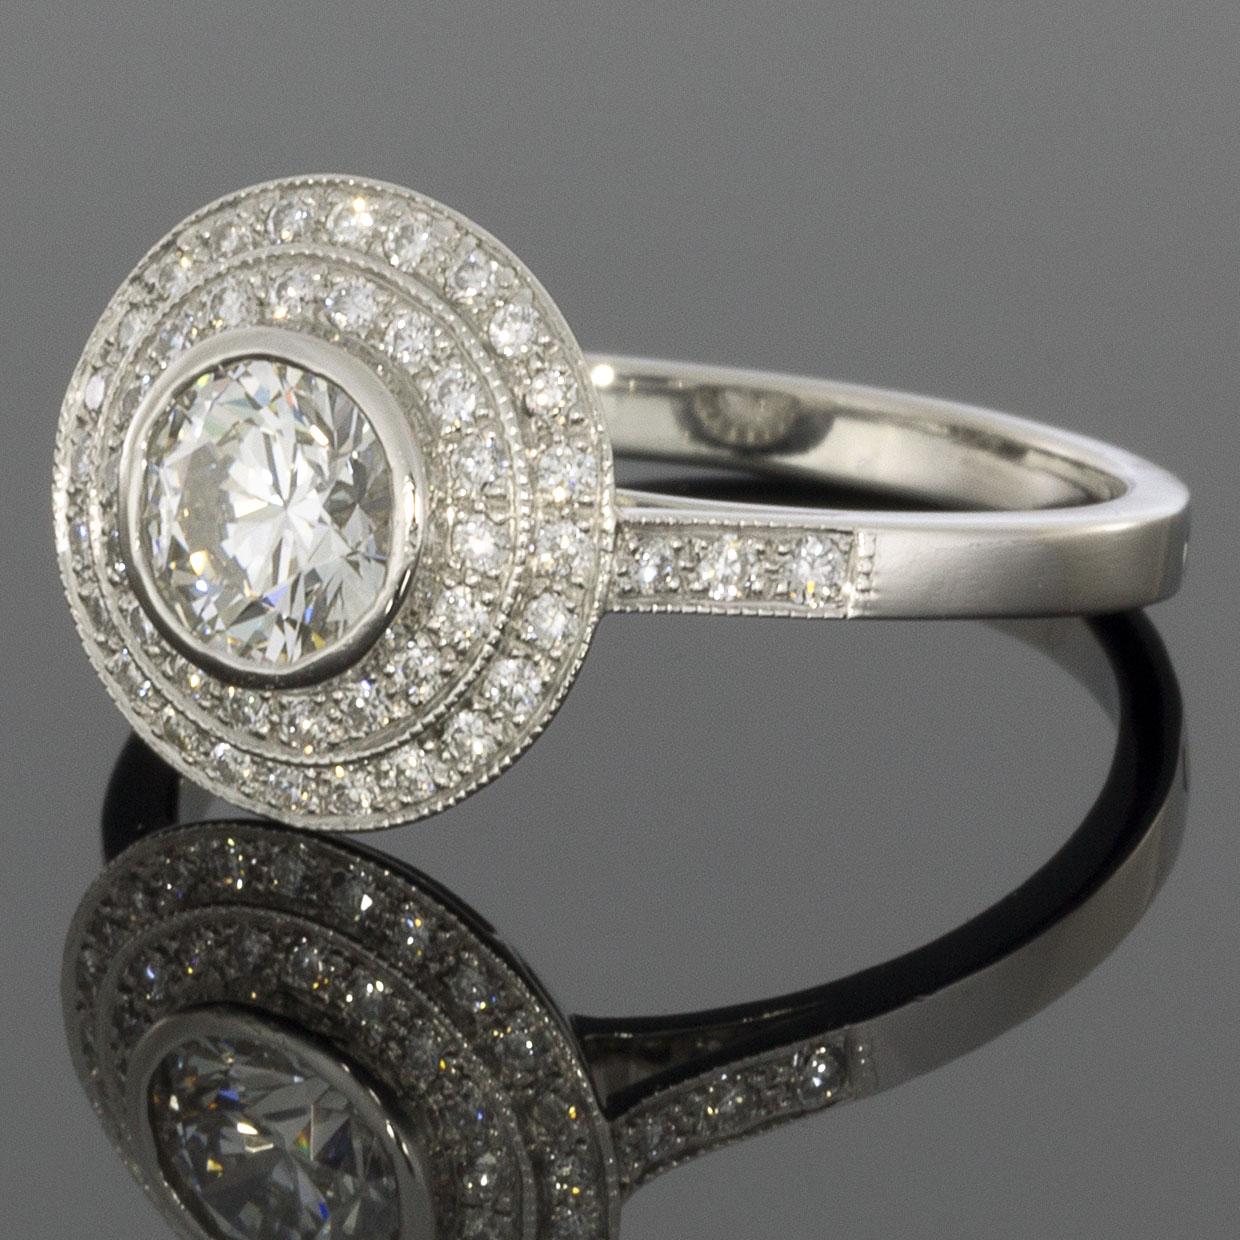 Item Details:
Estimated Retail - $7,150.00+ (See appraisal pic)
Brand - Sebastien Barier
Collection - Art Deco
Metal - Platinum
Total Carat Weight (TCW) - 1.13 ctw
Style - Deco Double Halo Engagement Ring
Ring Size - 6.75
Sizable - Yes
Width - 2.00